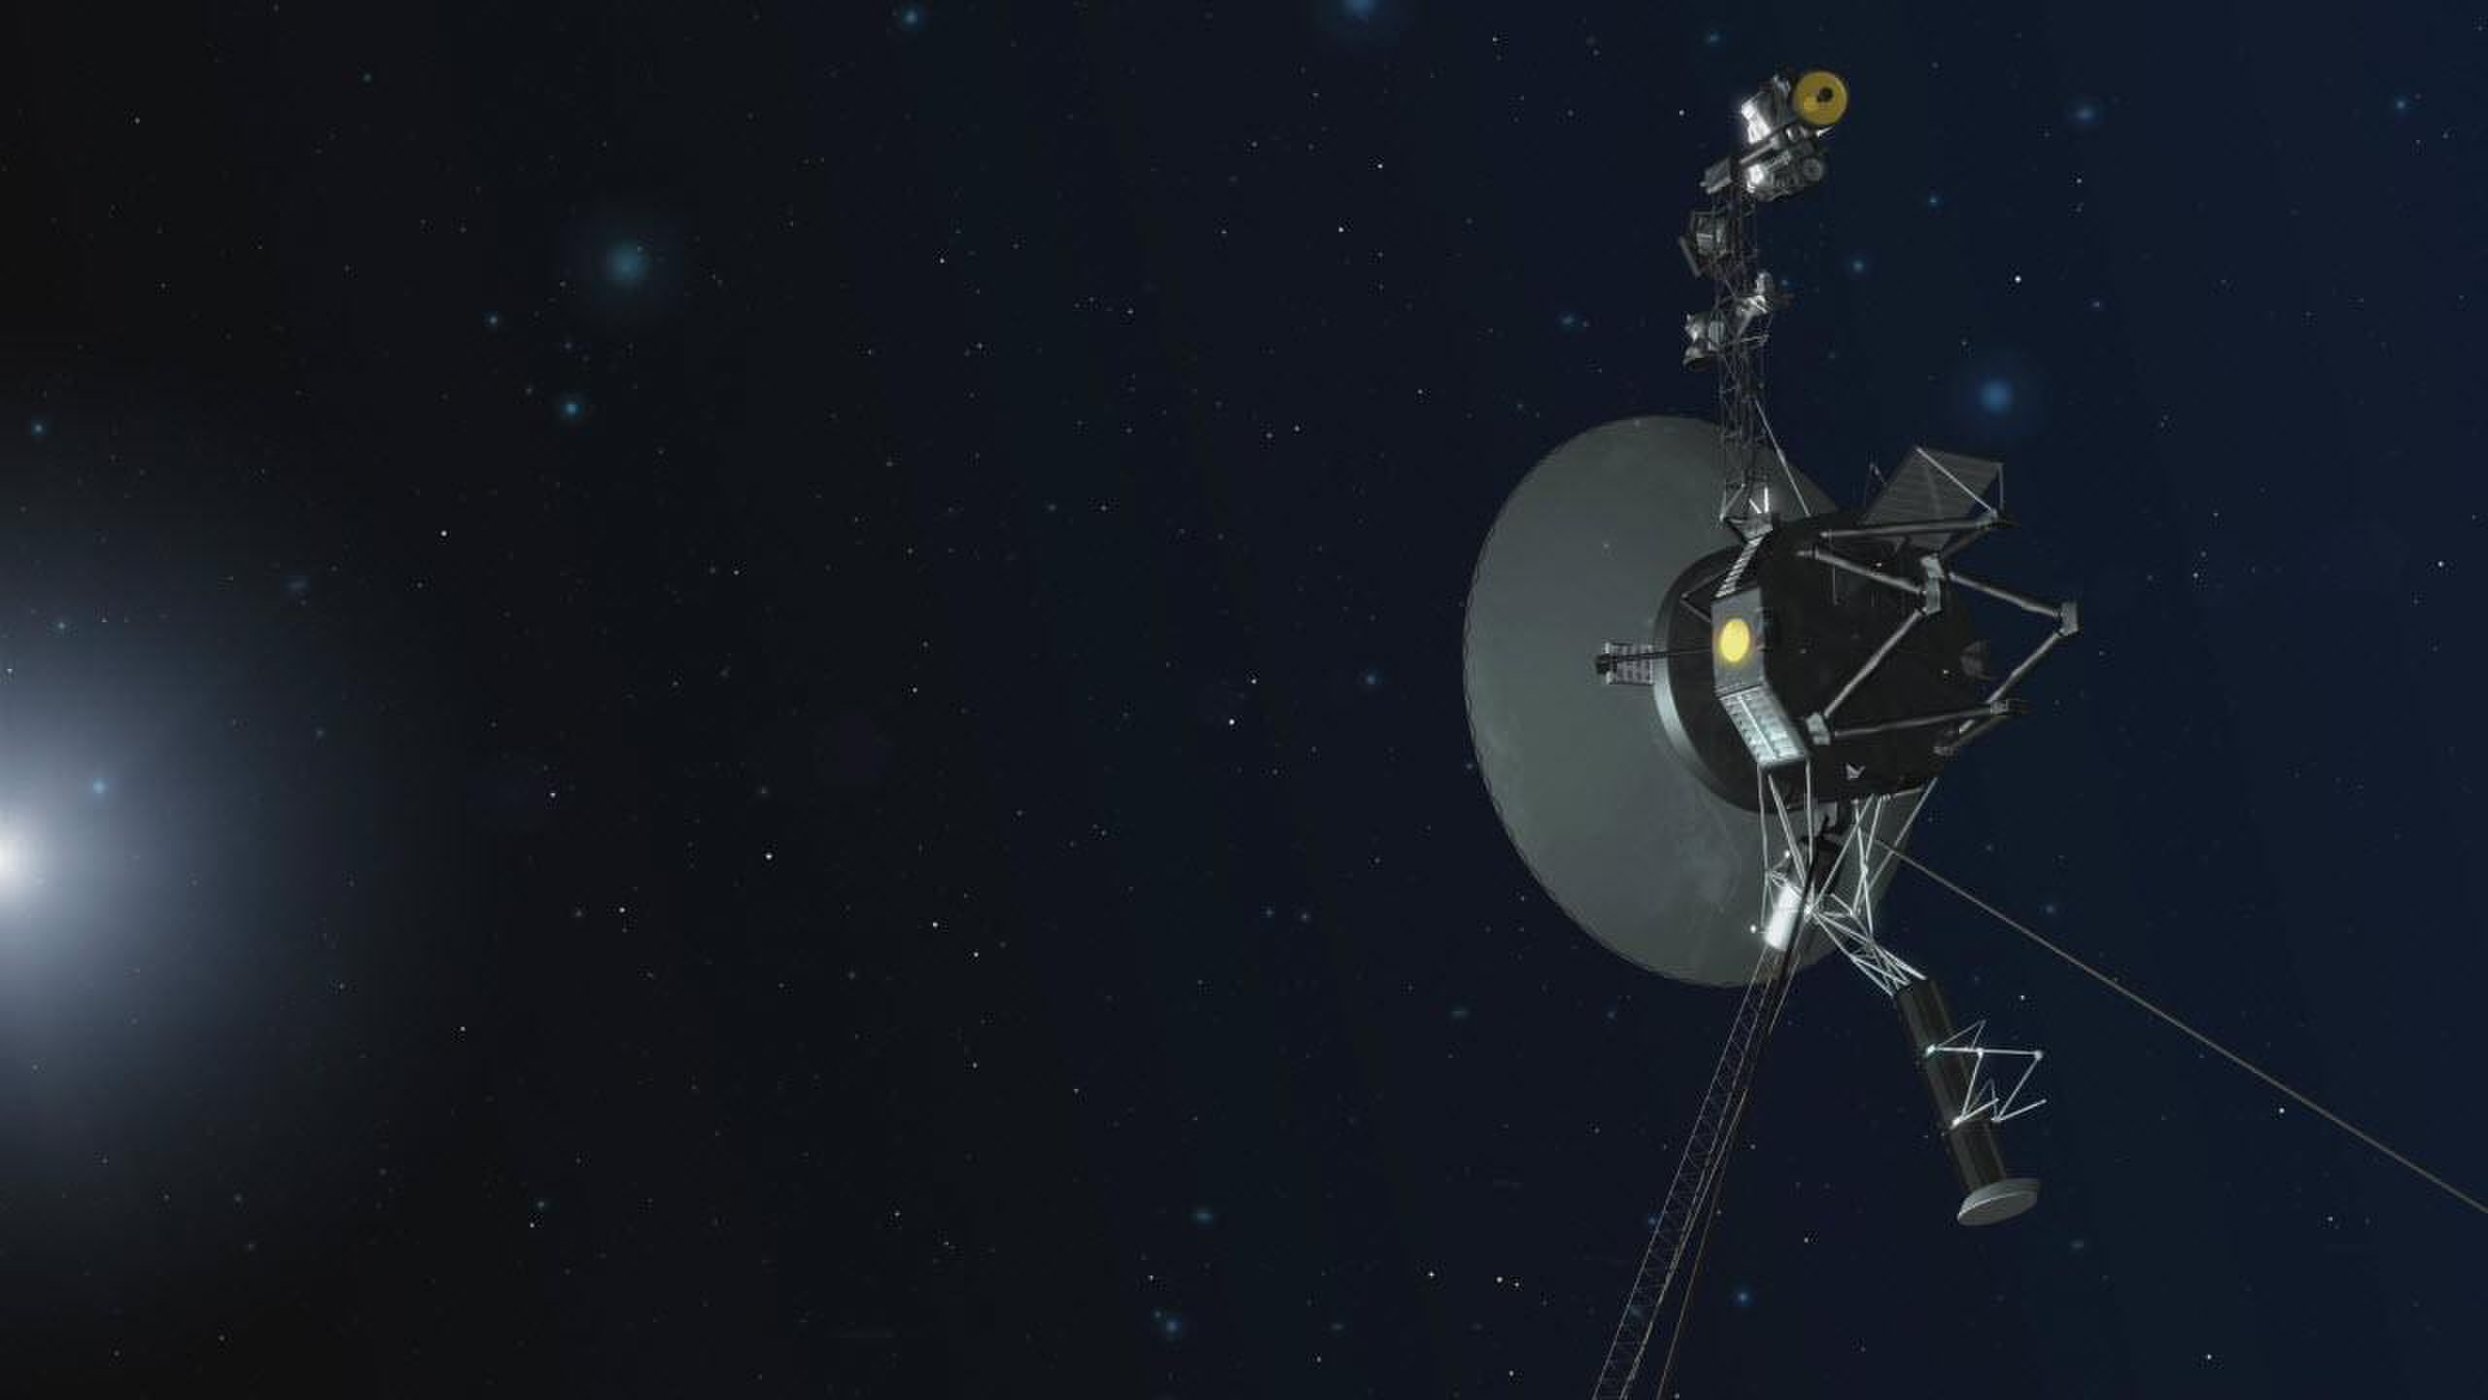 Voyager 1 Fires Its Backup Thrusters for the 1st Time in 37 Years